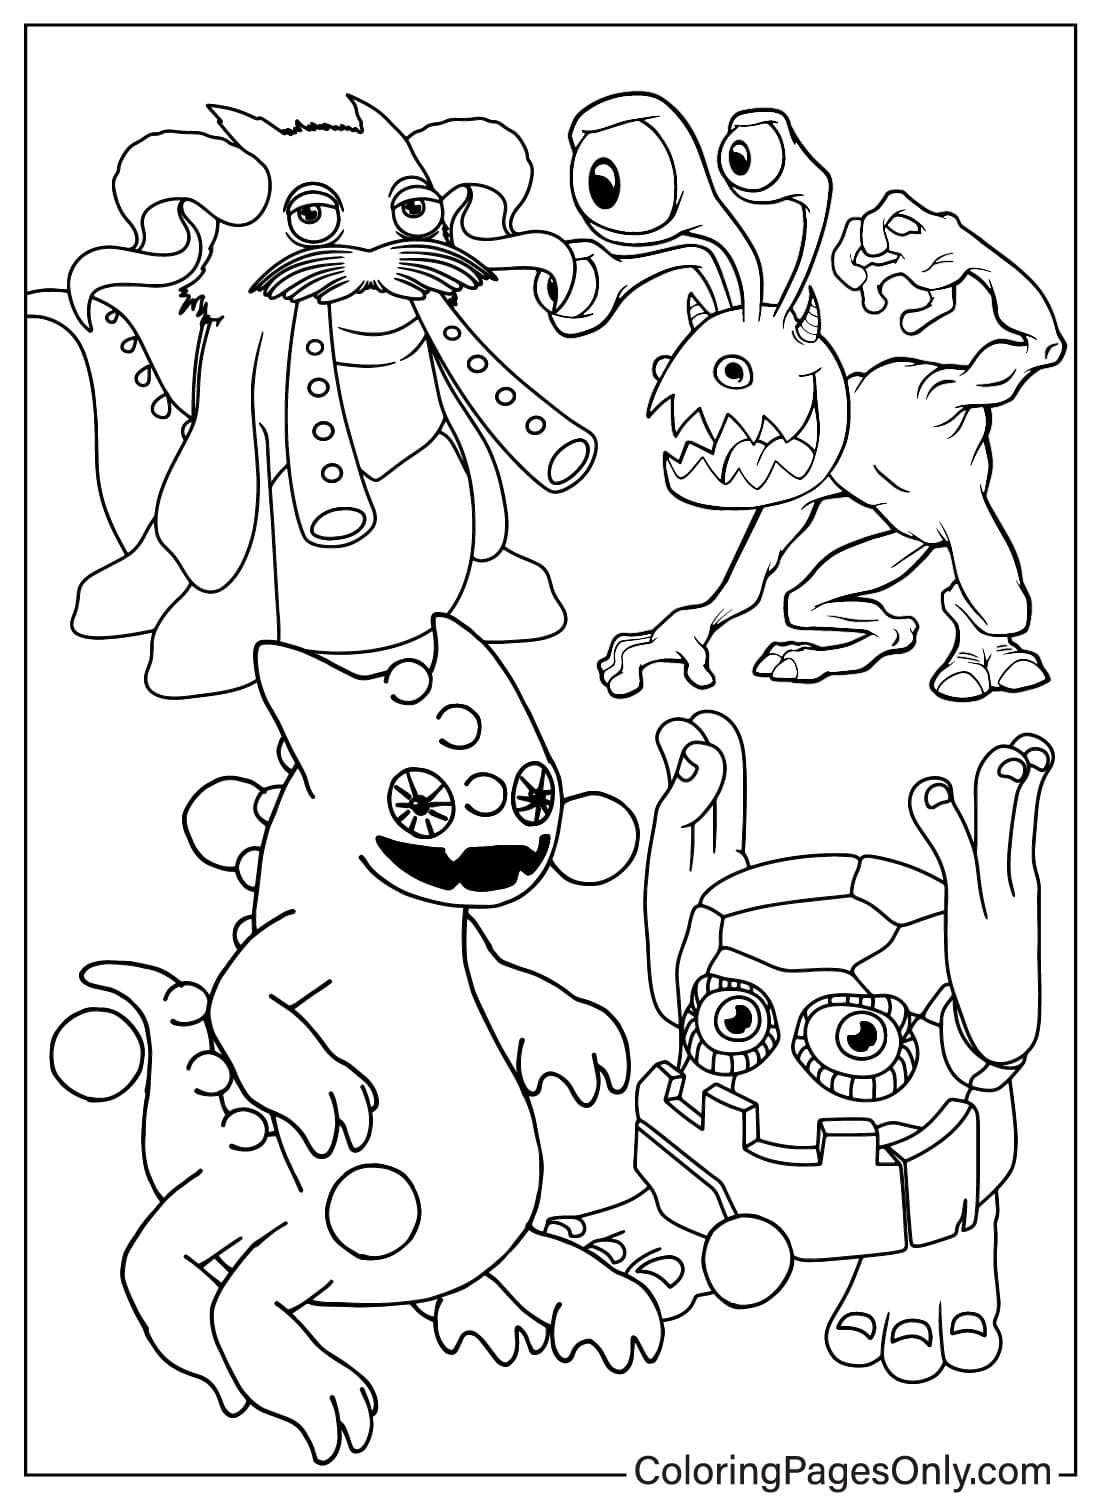 Ghazt My Singing Monsters Coloring Page from Ghazt